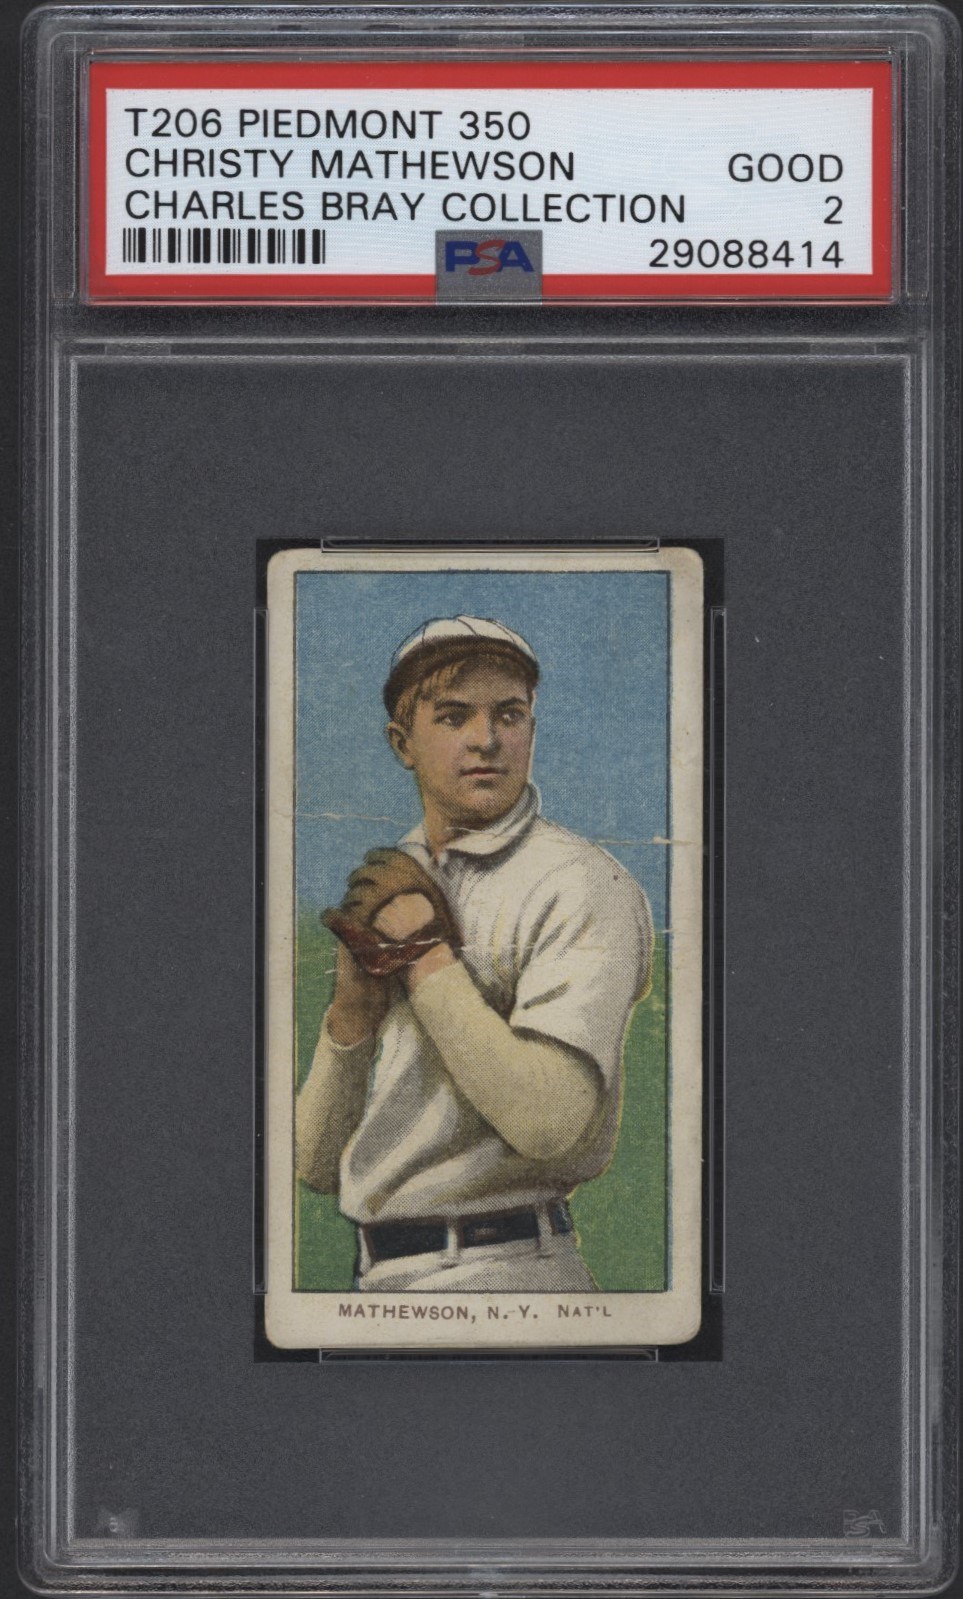 Baseball and Trading Cards - T206 Piedmont 350 Christy Mathewson PSA 2 From the Charles Bray Collection